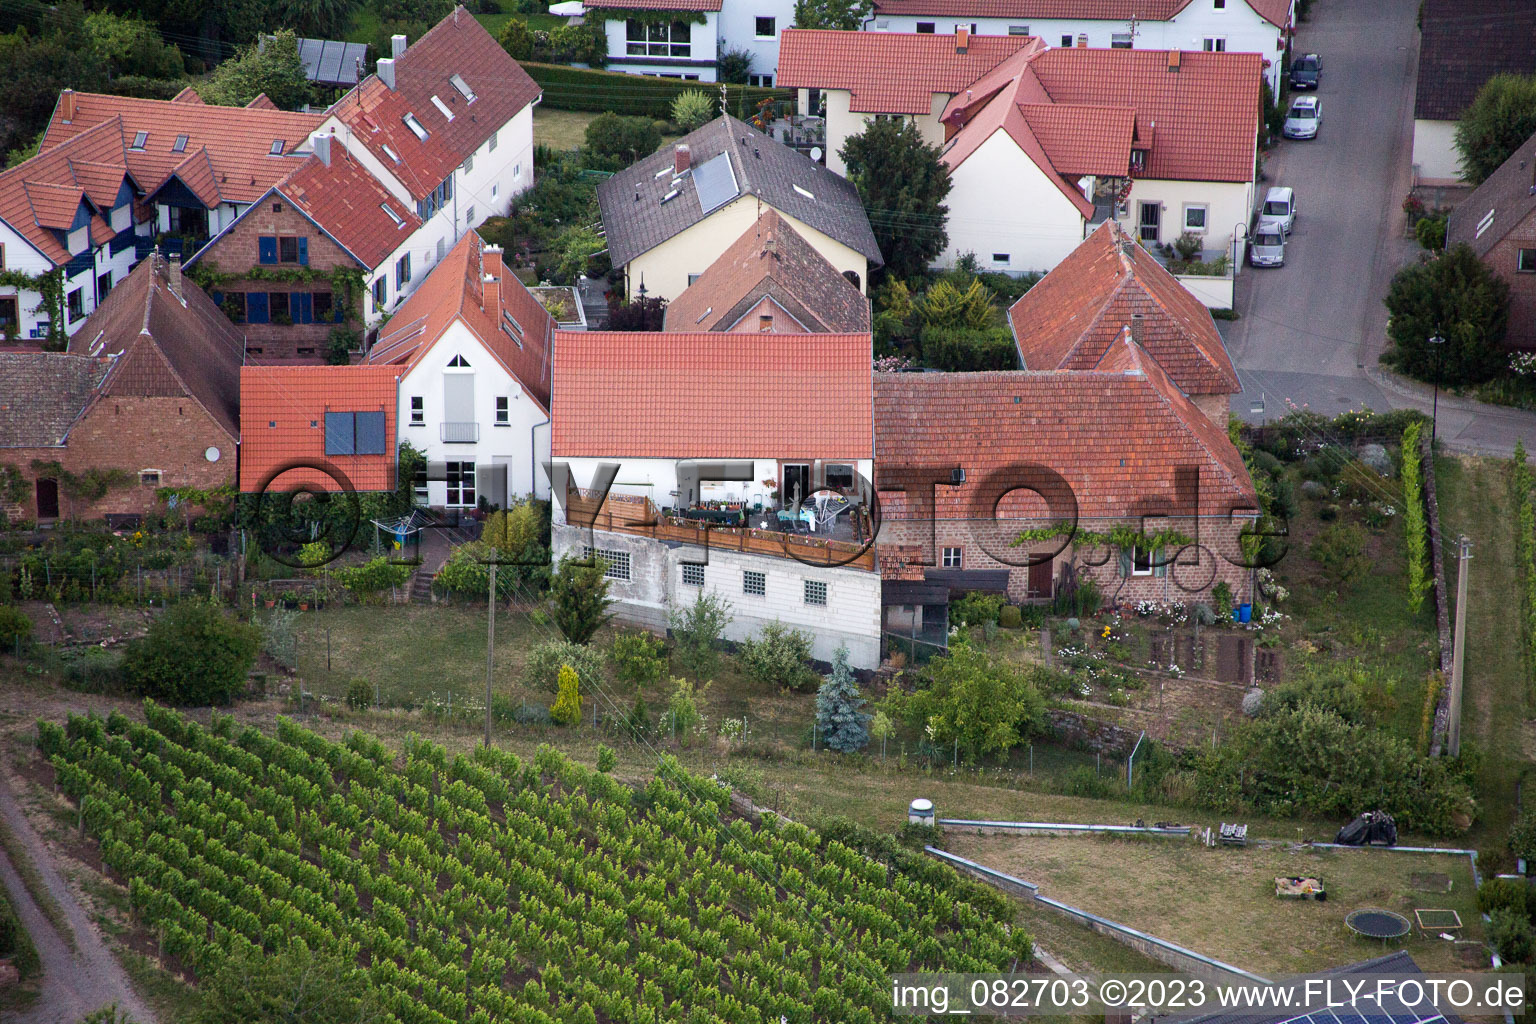 Aerial photograpy of Weyher in der Pfalz in the state Rhineland-Palatinate, Germany